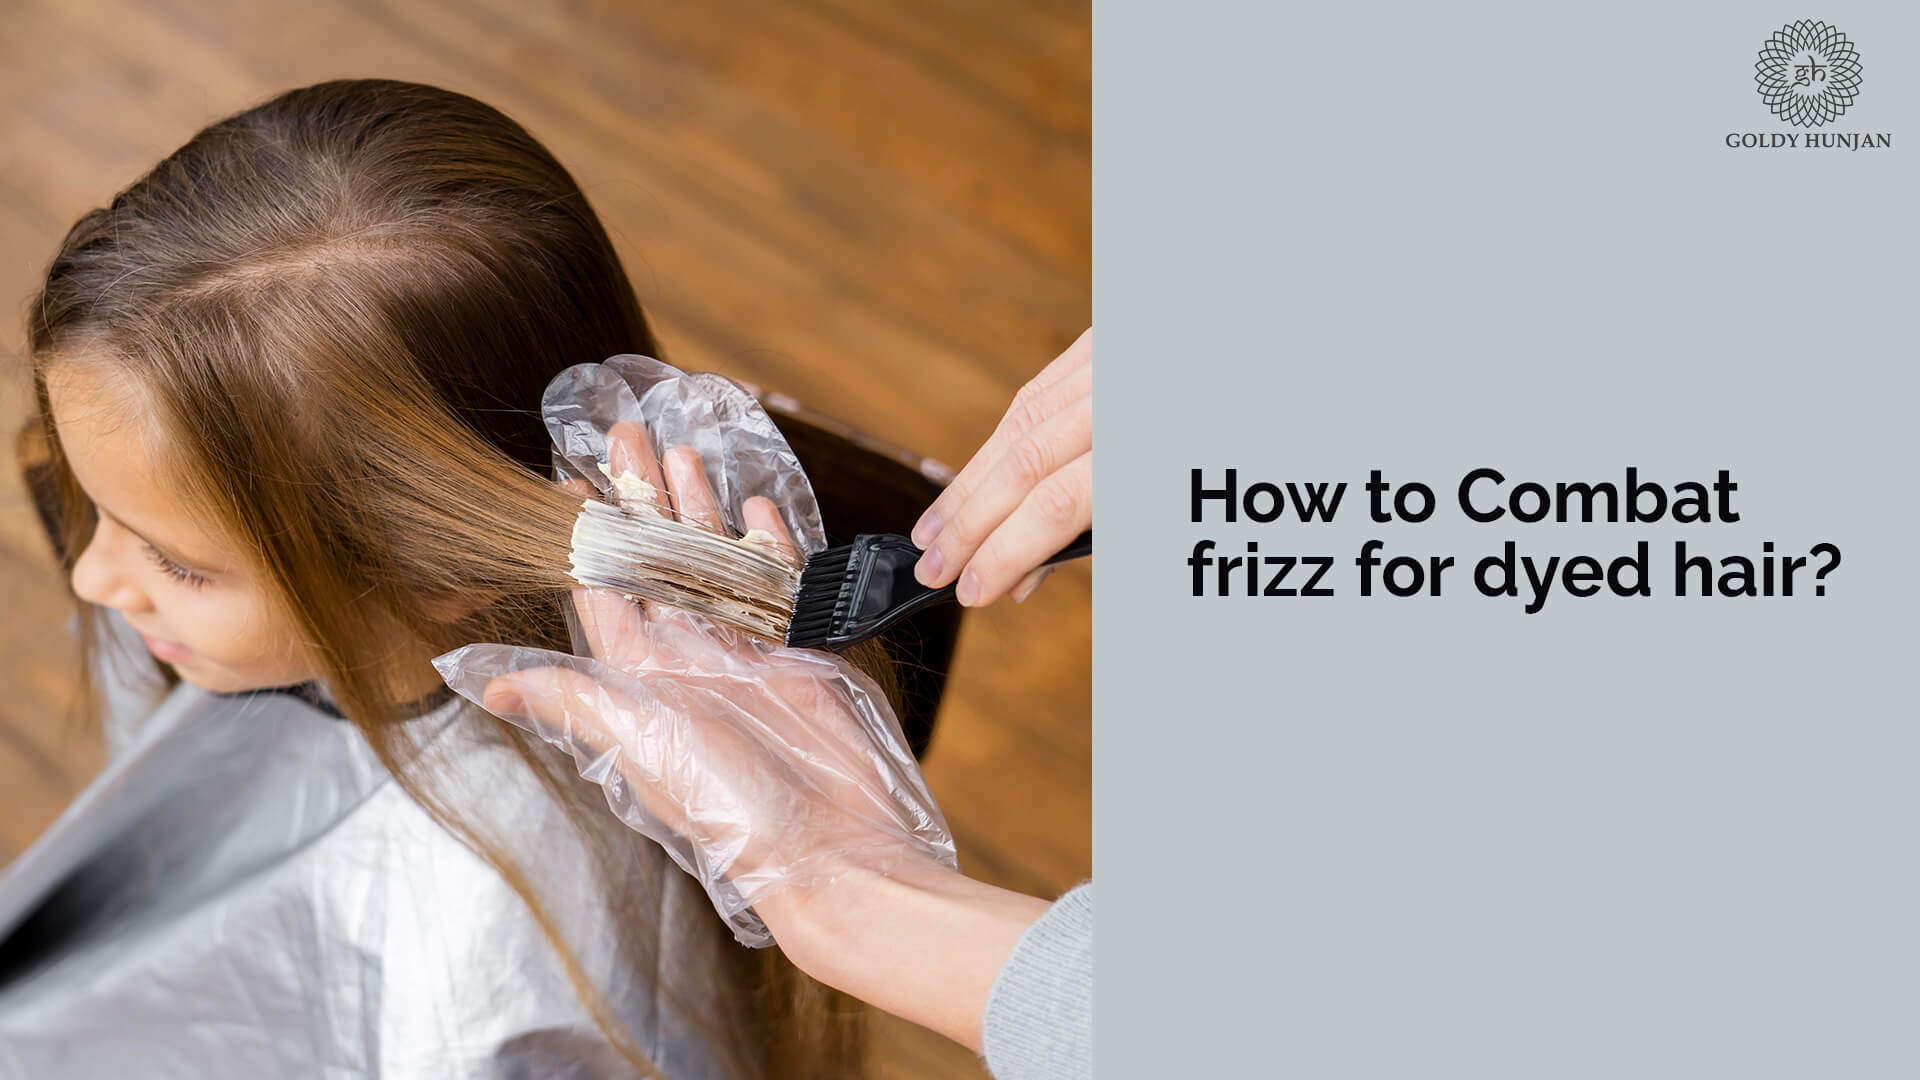 How to combat Frizz for dyed hair